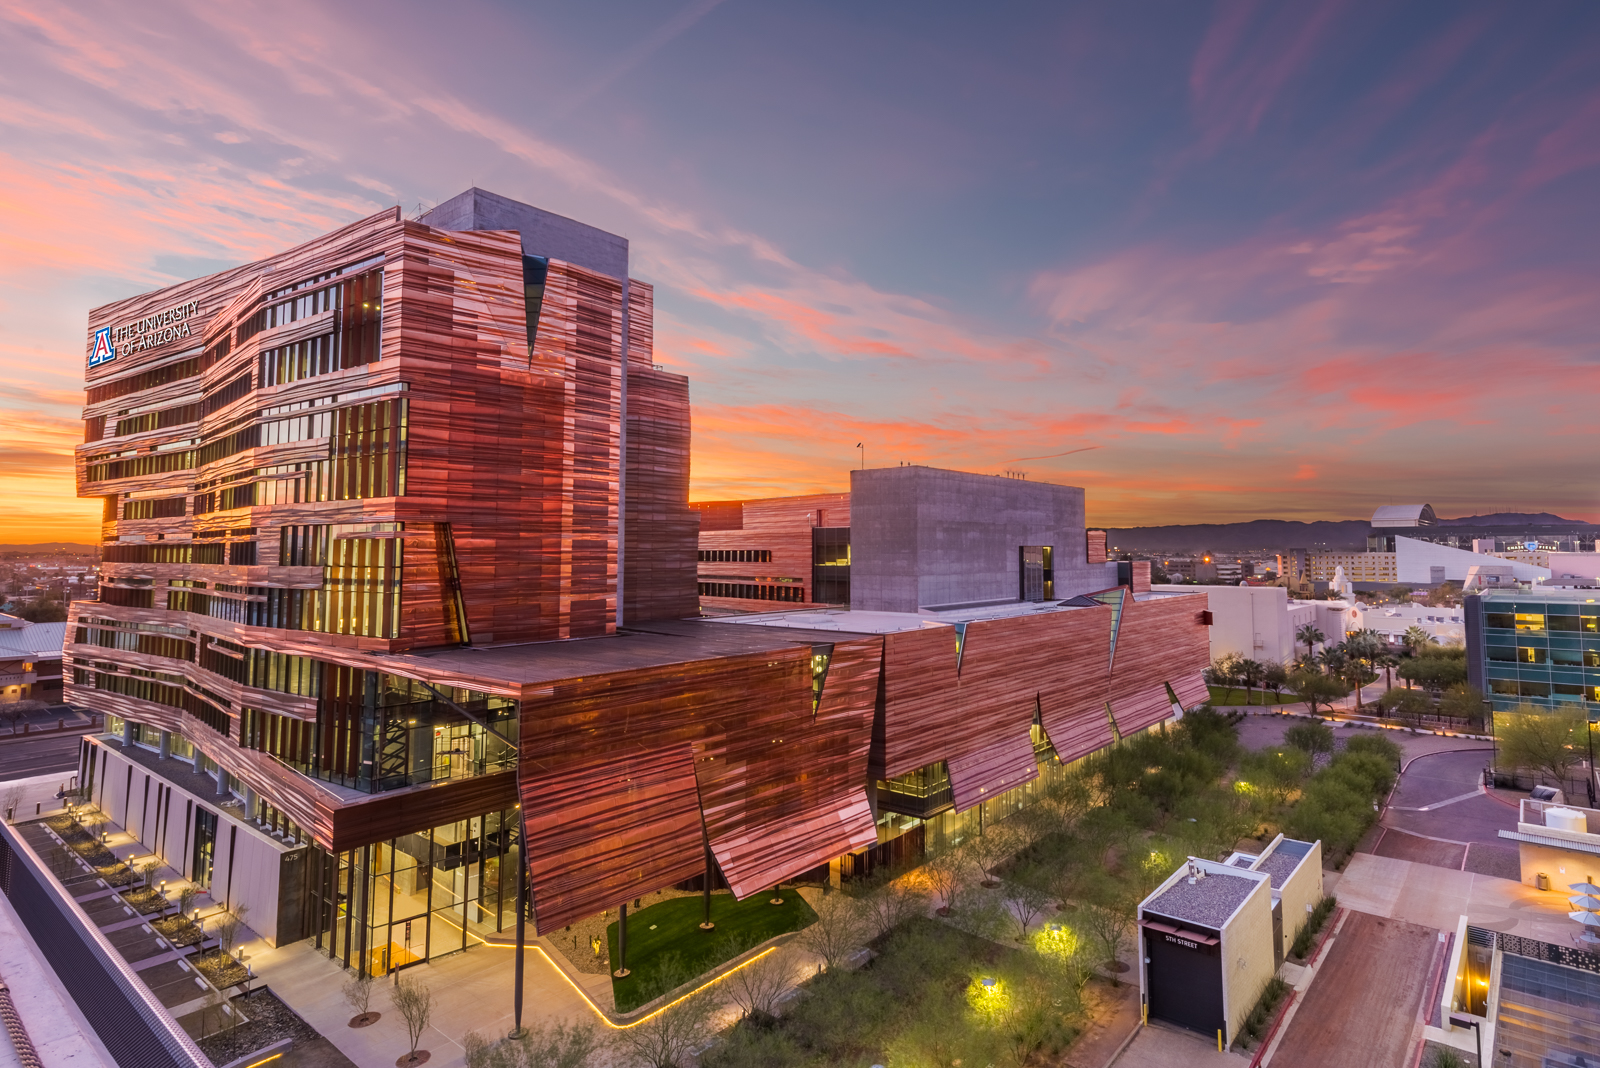 The University of Arizona College of Medicine Biomedical Sciences Partnership Building in Downtown Phoenix at sunset.